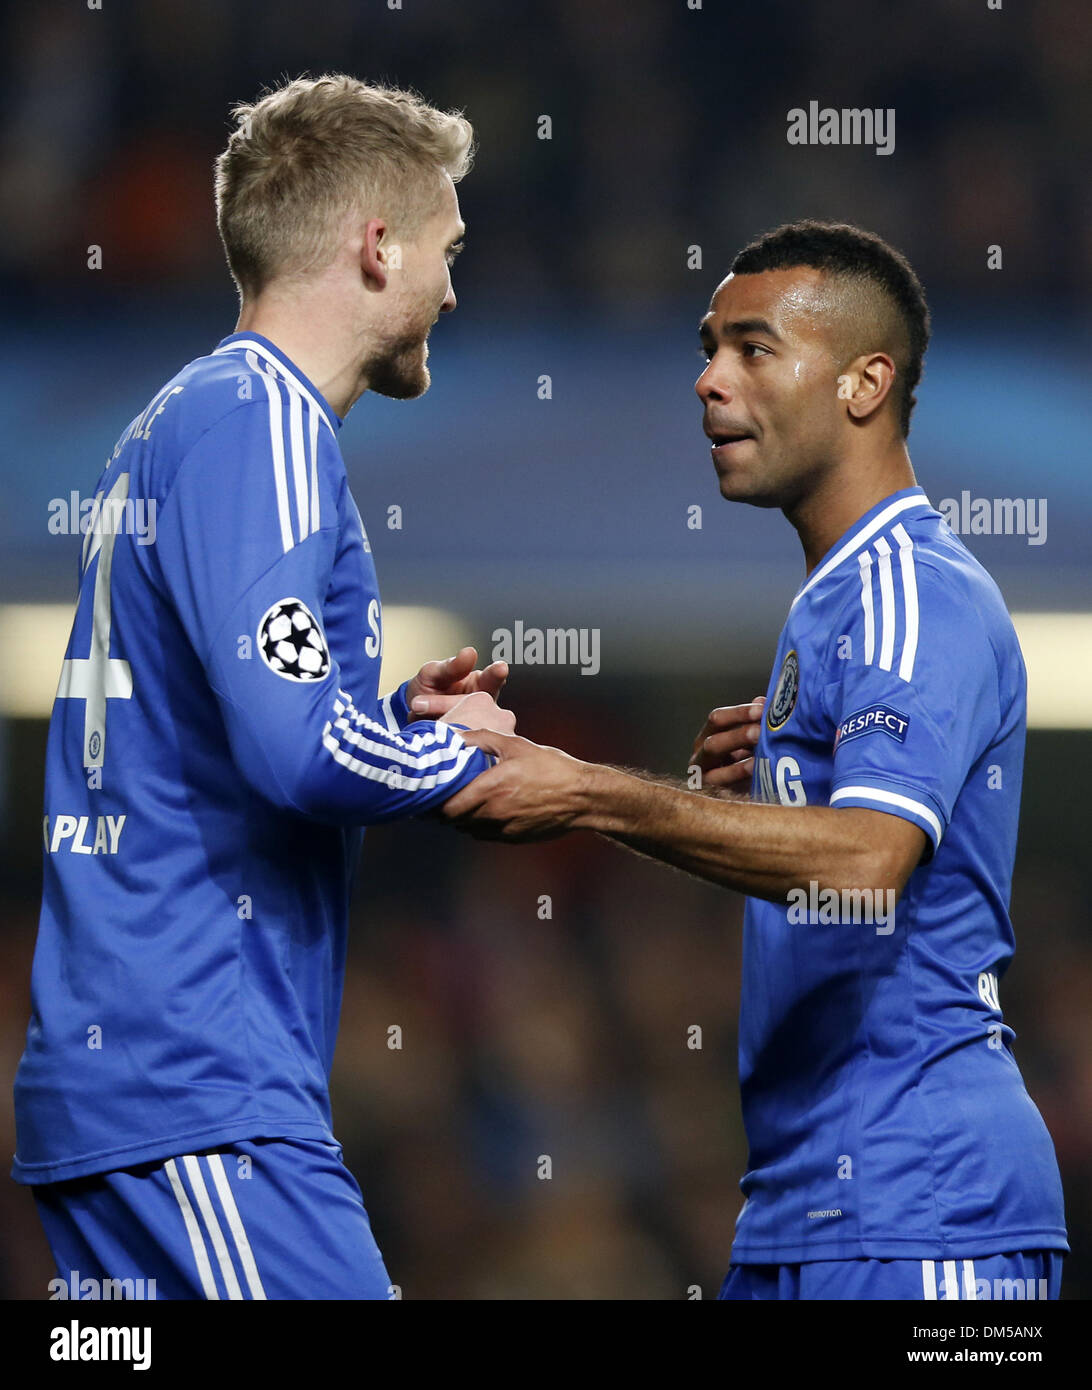 (131212) -- LONDON, Dec 12, 2013 (Xinhua) -- Ashley Cole (R) of Chelsea communicates with teammate Andre Schurrle during the UEFA Champions League Group E match between Chelsea and FC Steaua Bucharest at Stamford Bridge Stadium in London, Britain, on Dec. 11, 2013. Chelsea won 1-0. (Xinhua/Wang Lili) Stock Photo